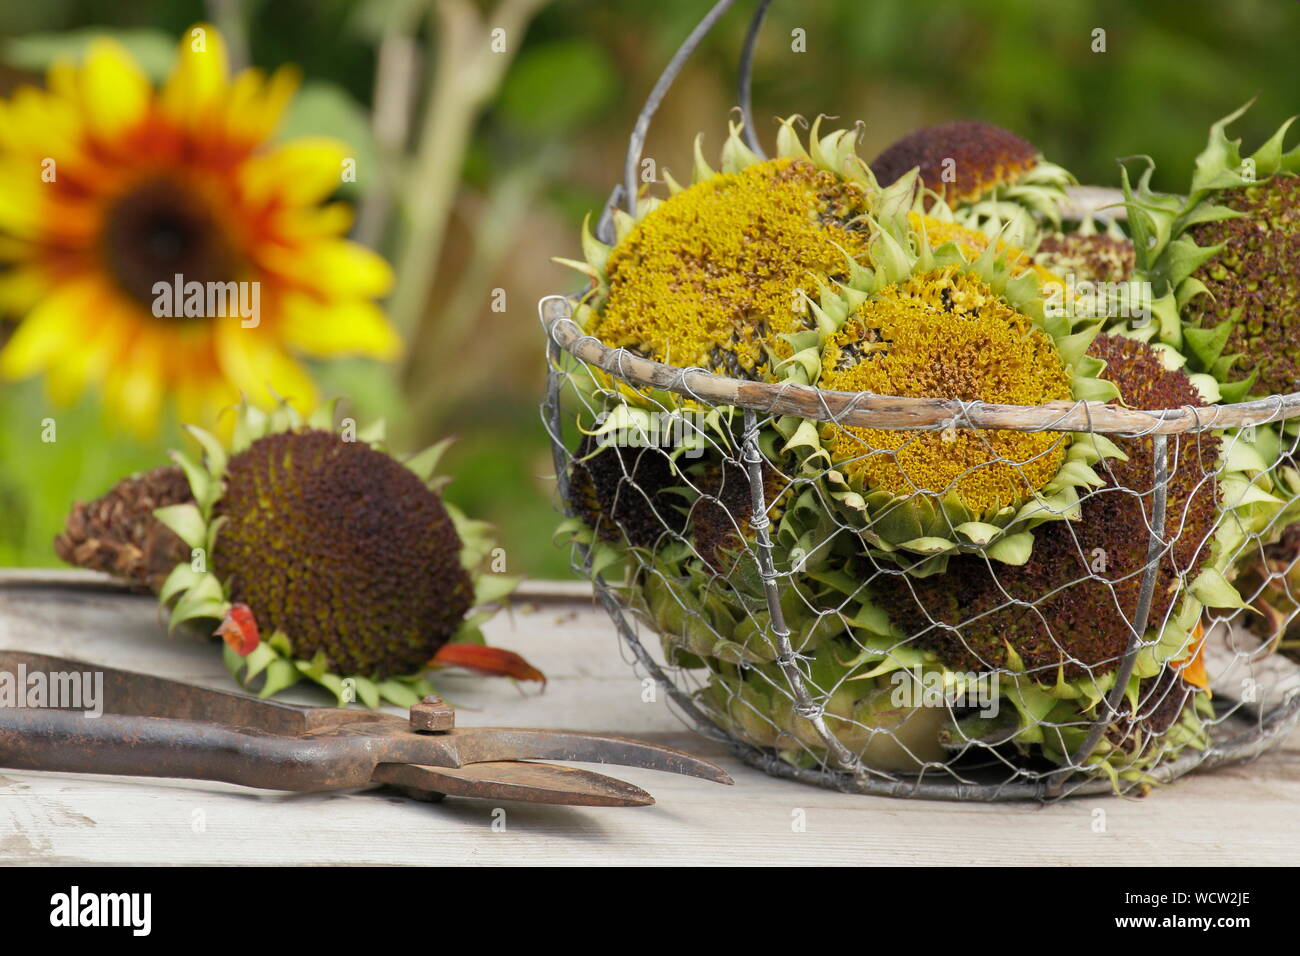 Helianthus annuus. Sunflower seedheads collected into a wire basket for drying Stock Photo